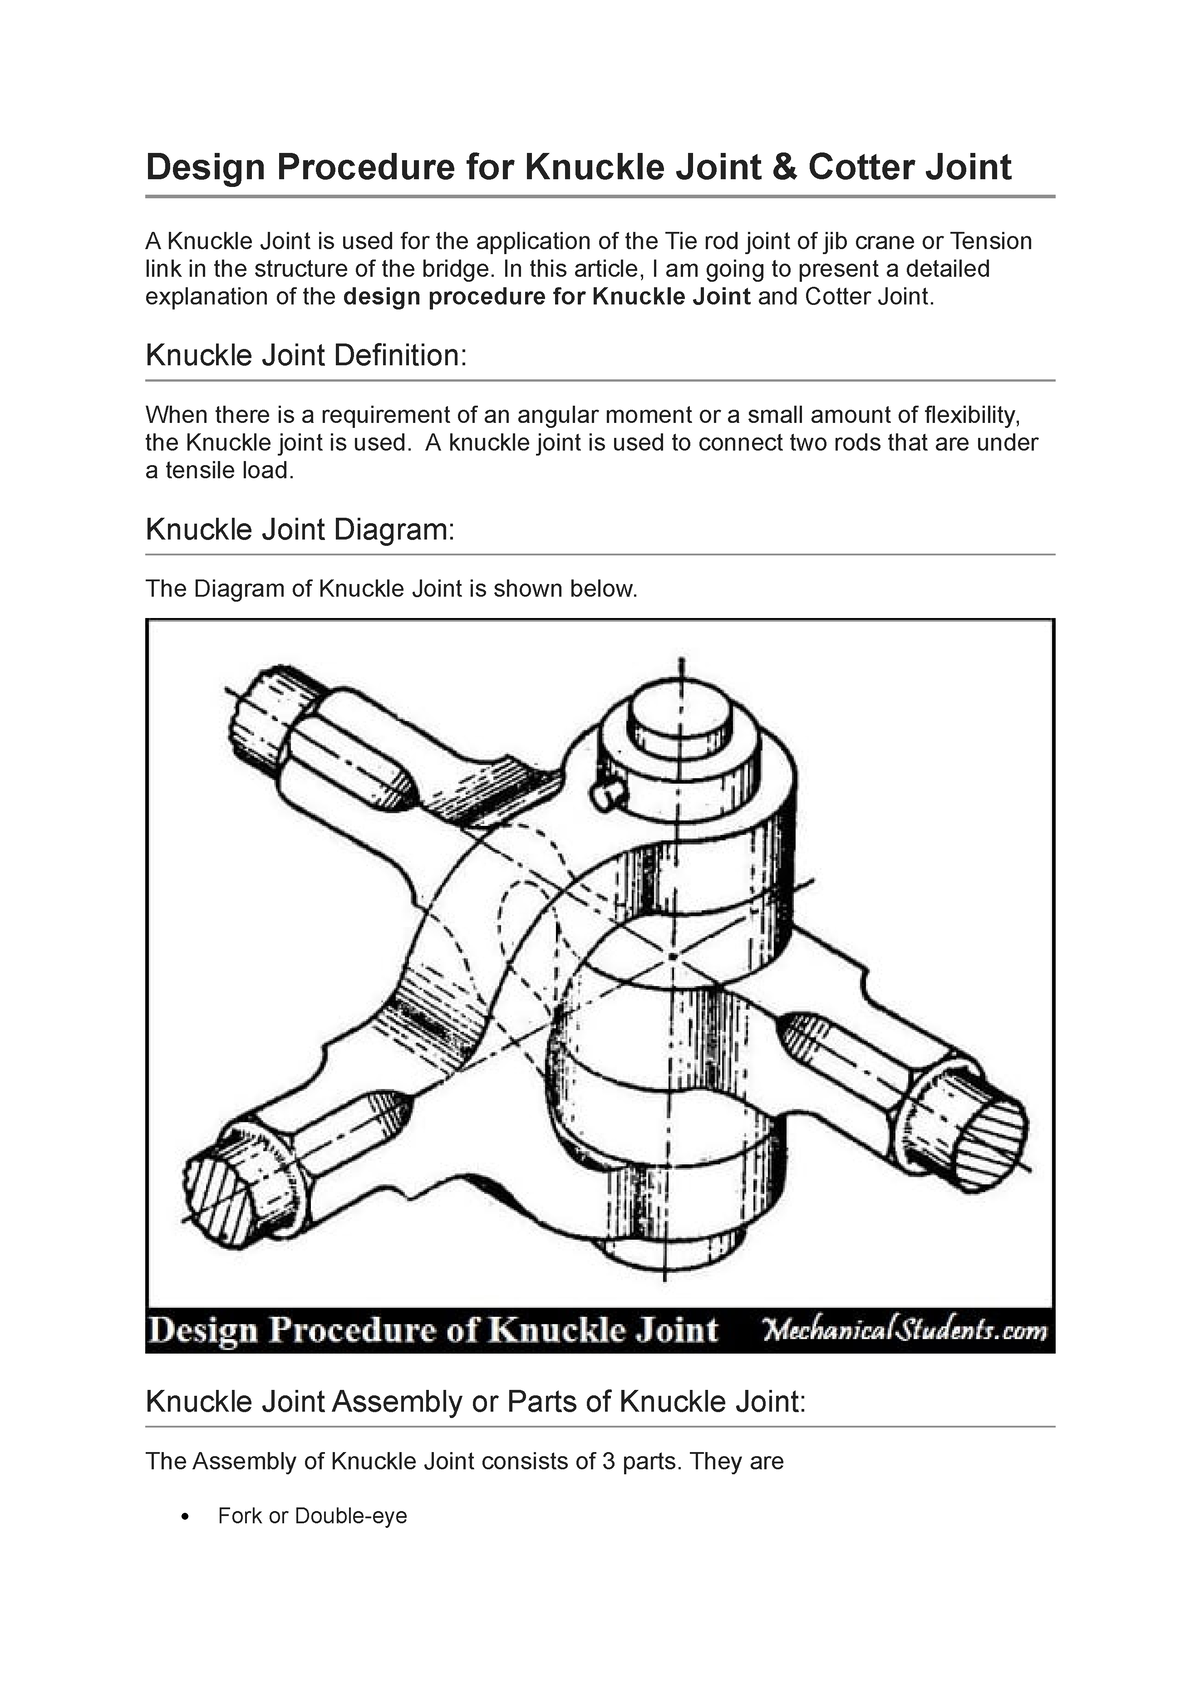 Study project on knuckle joint | PDF